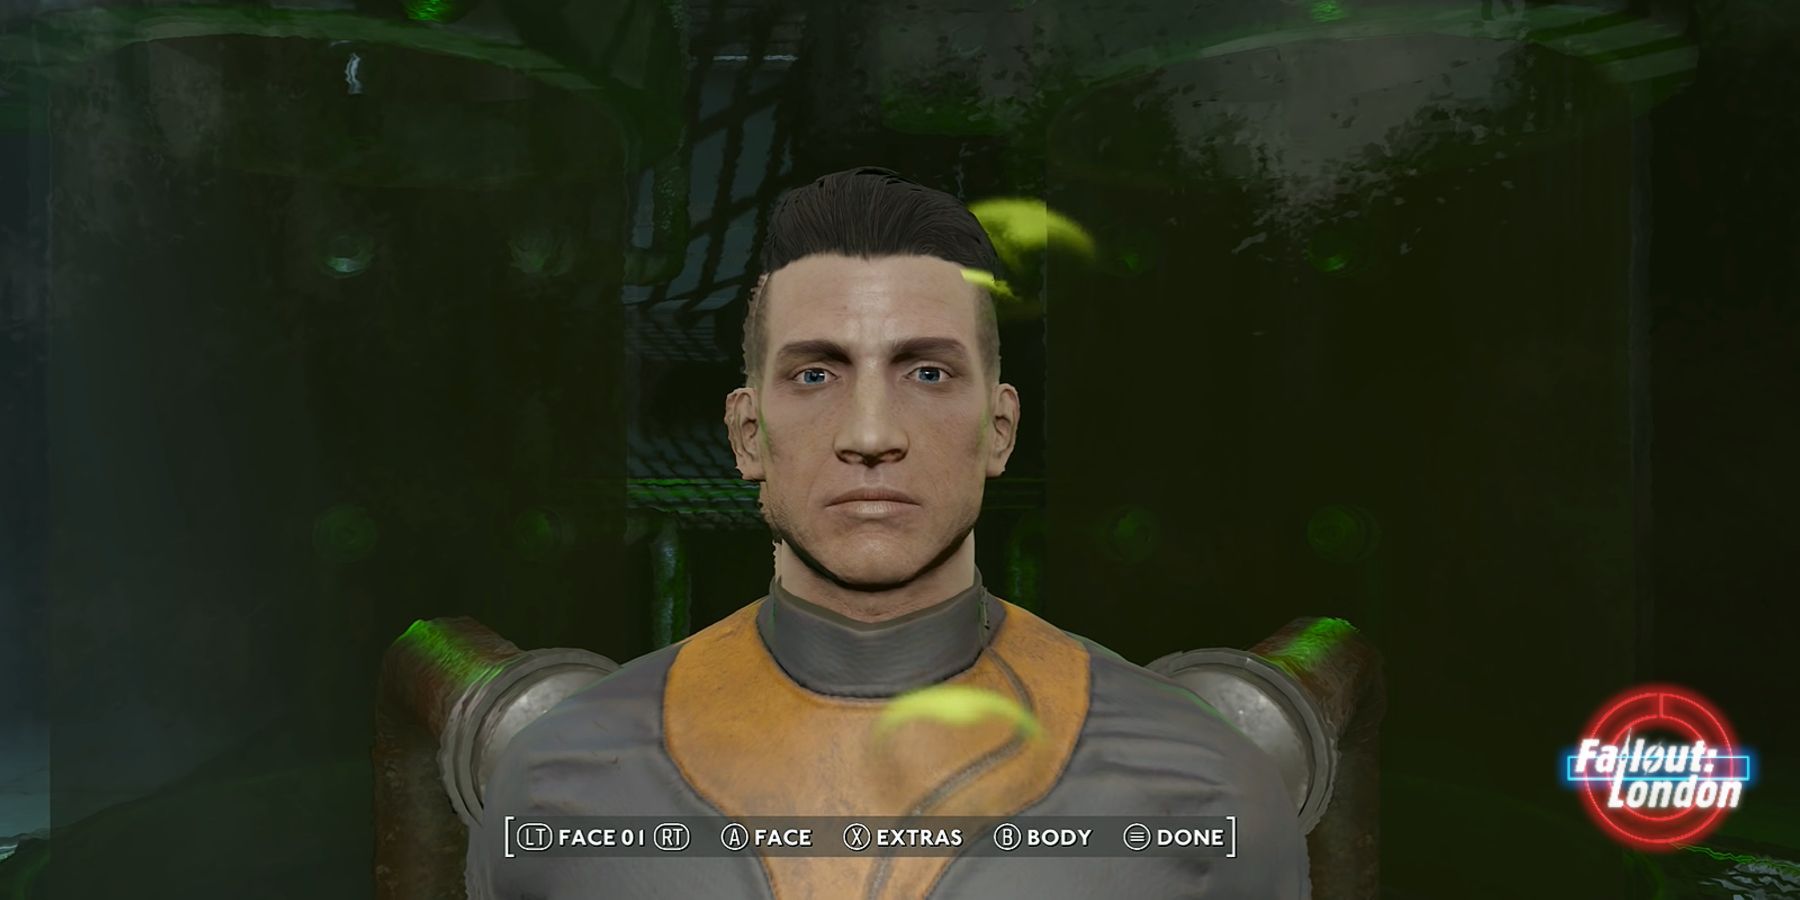 Fallout London Character Creation Appearance Gameplay Trailer